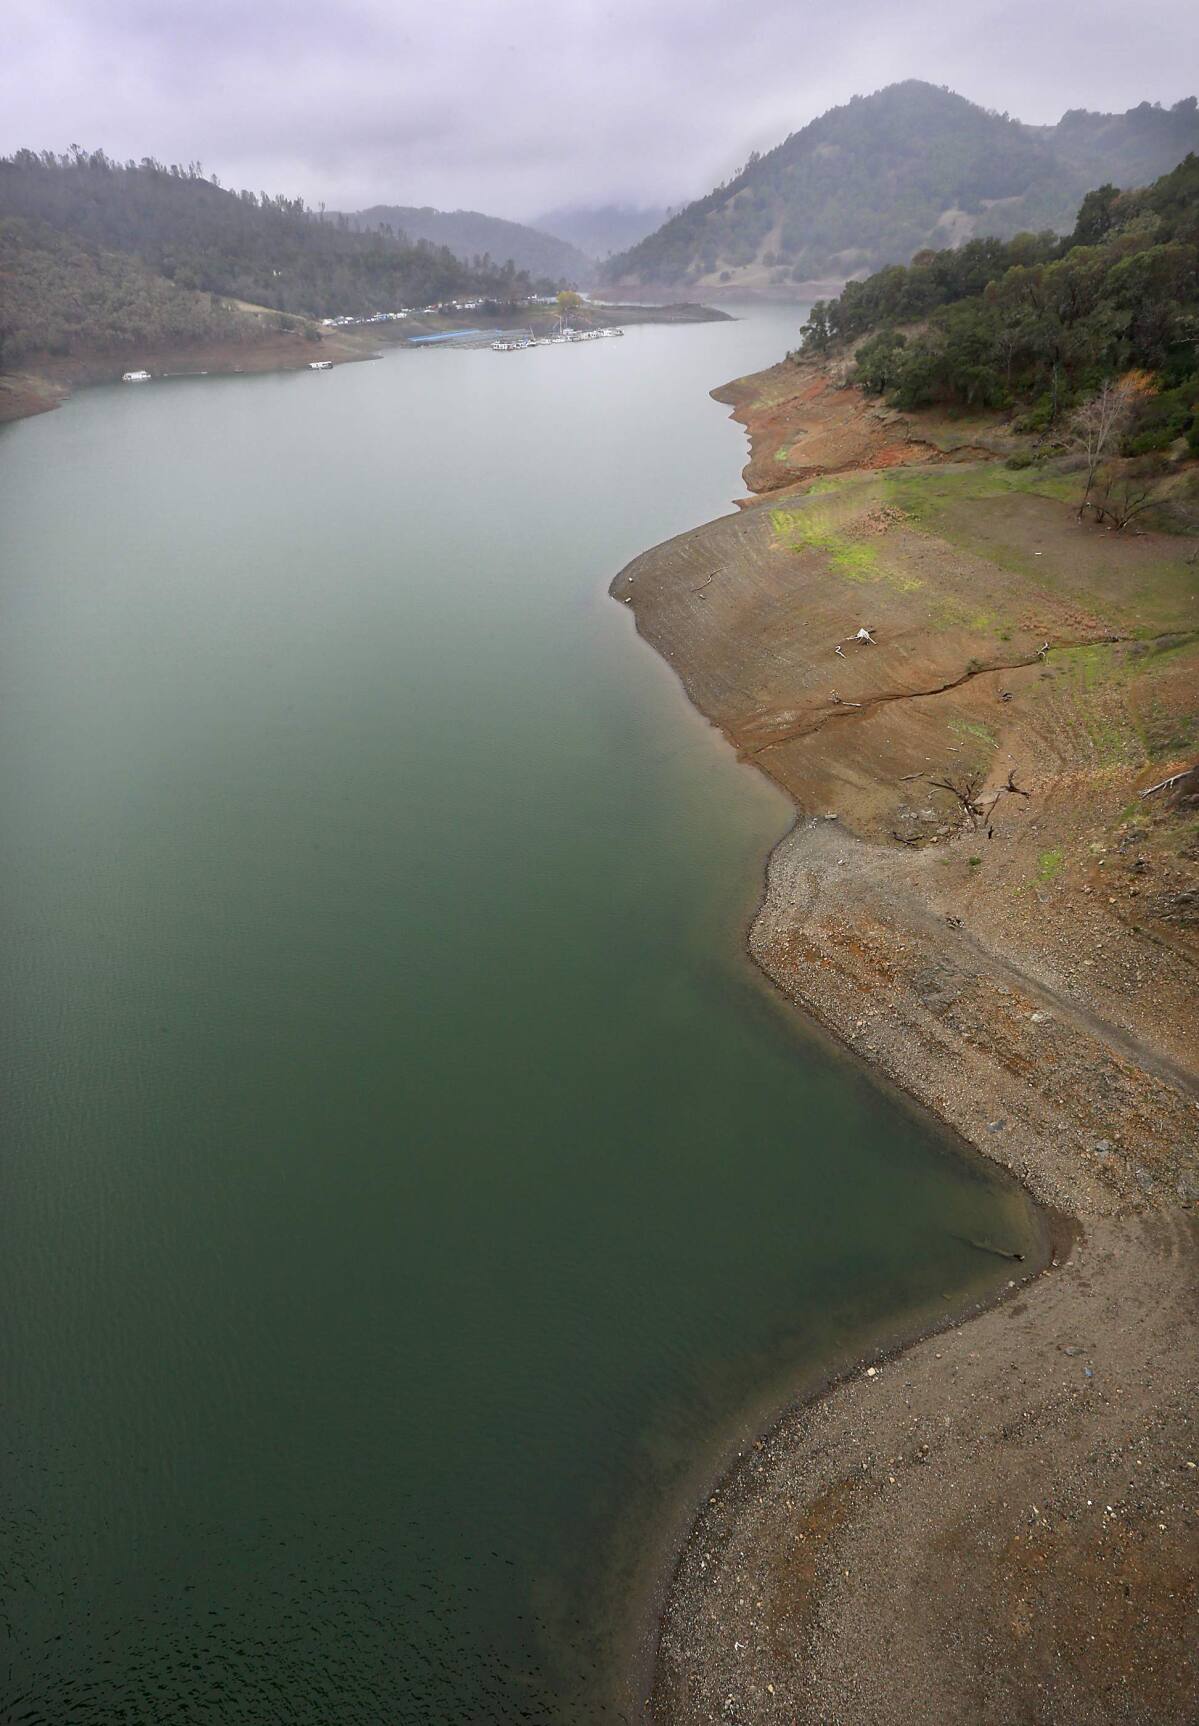 Lake Sonoma, Lake Mendocino get runoff boost from recent storms